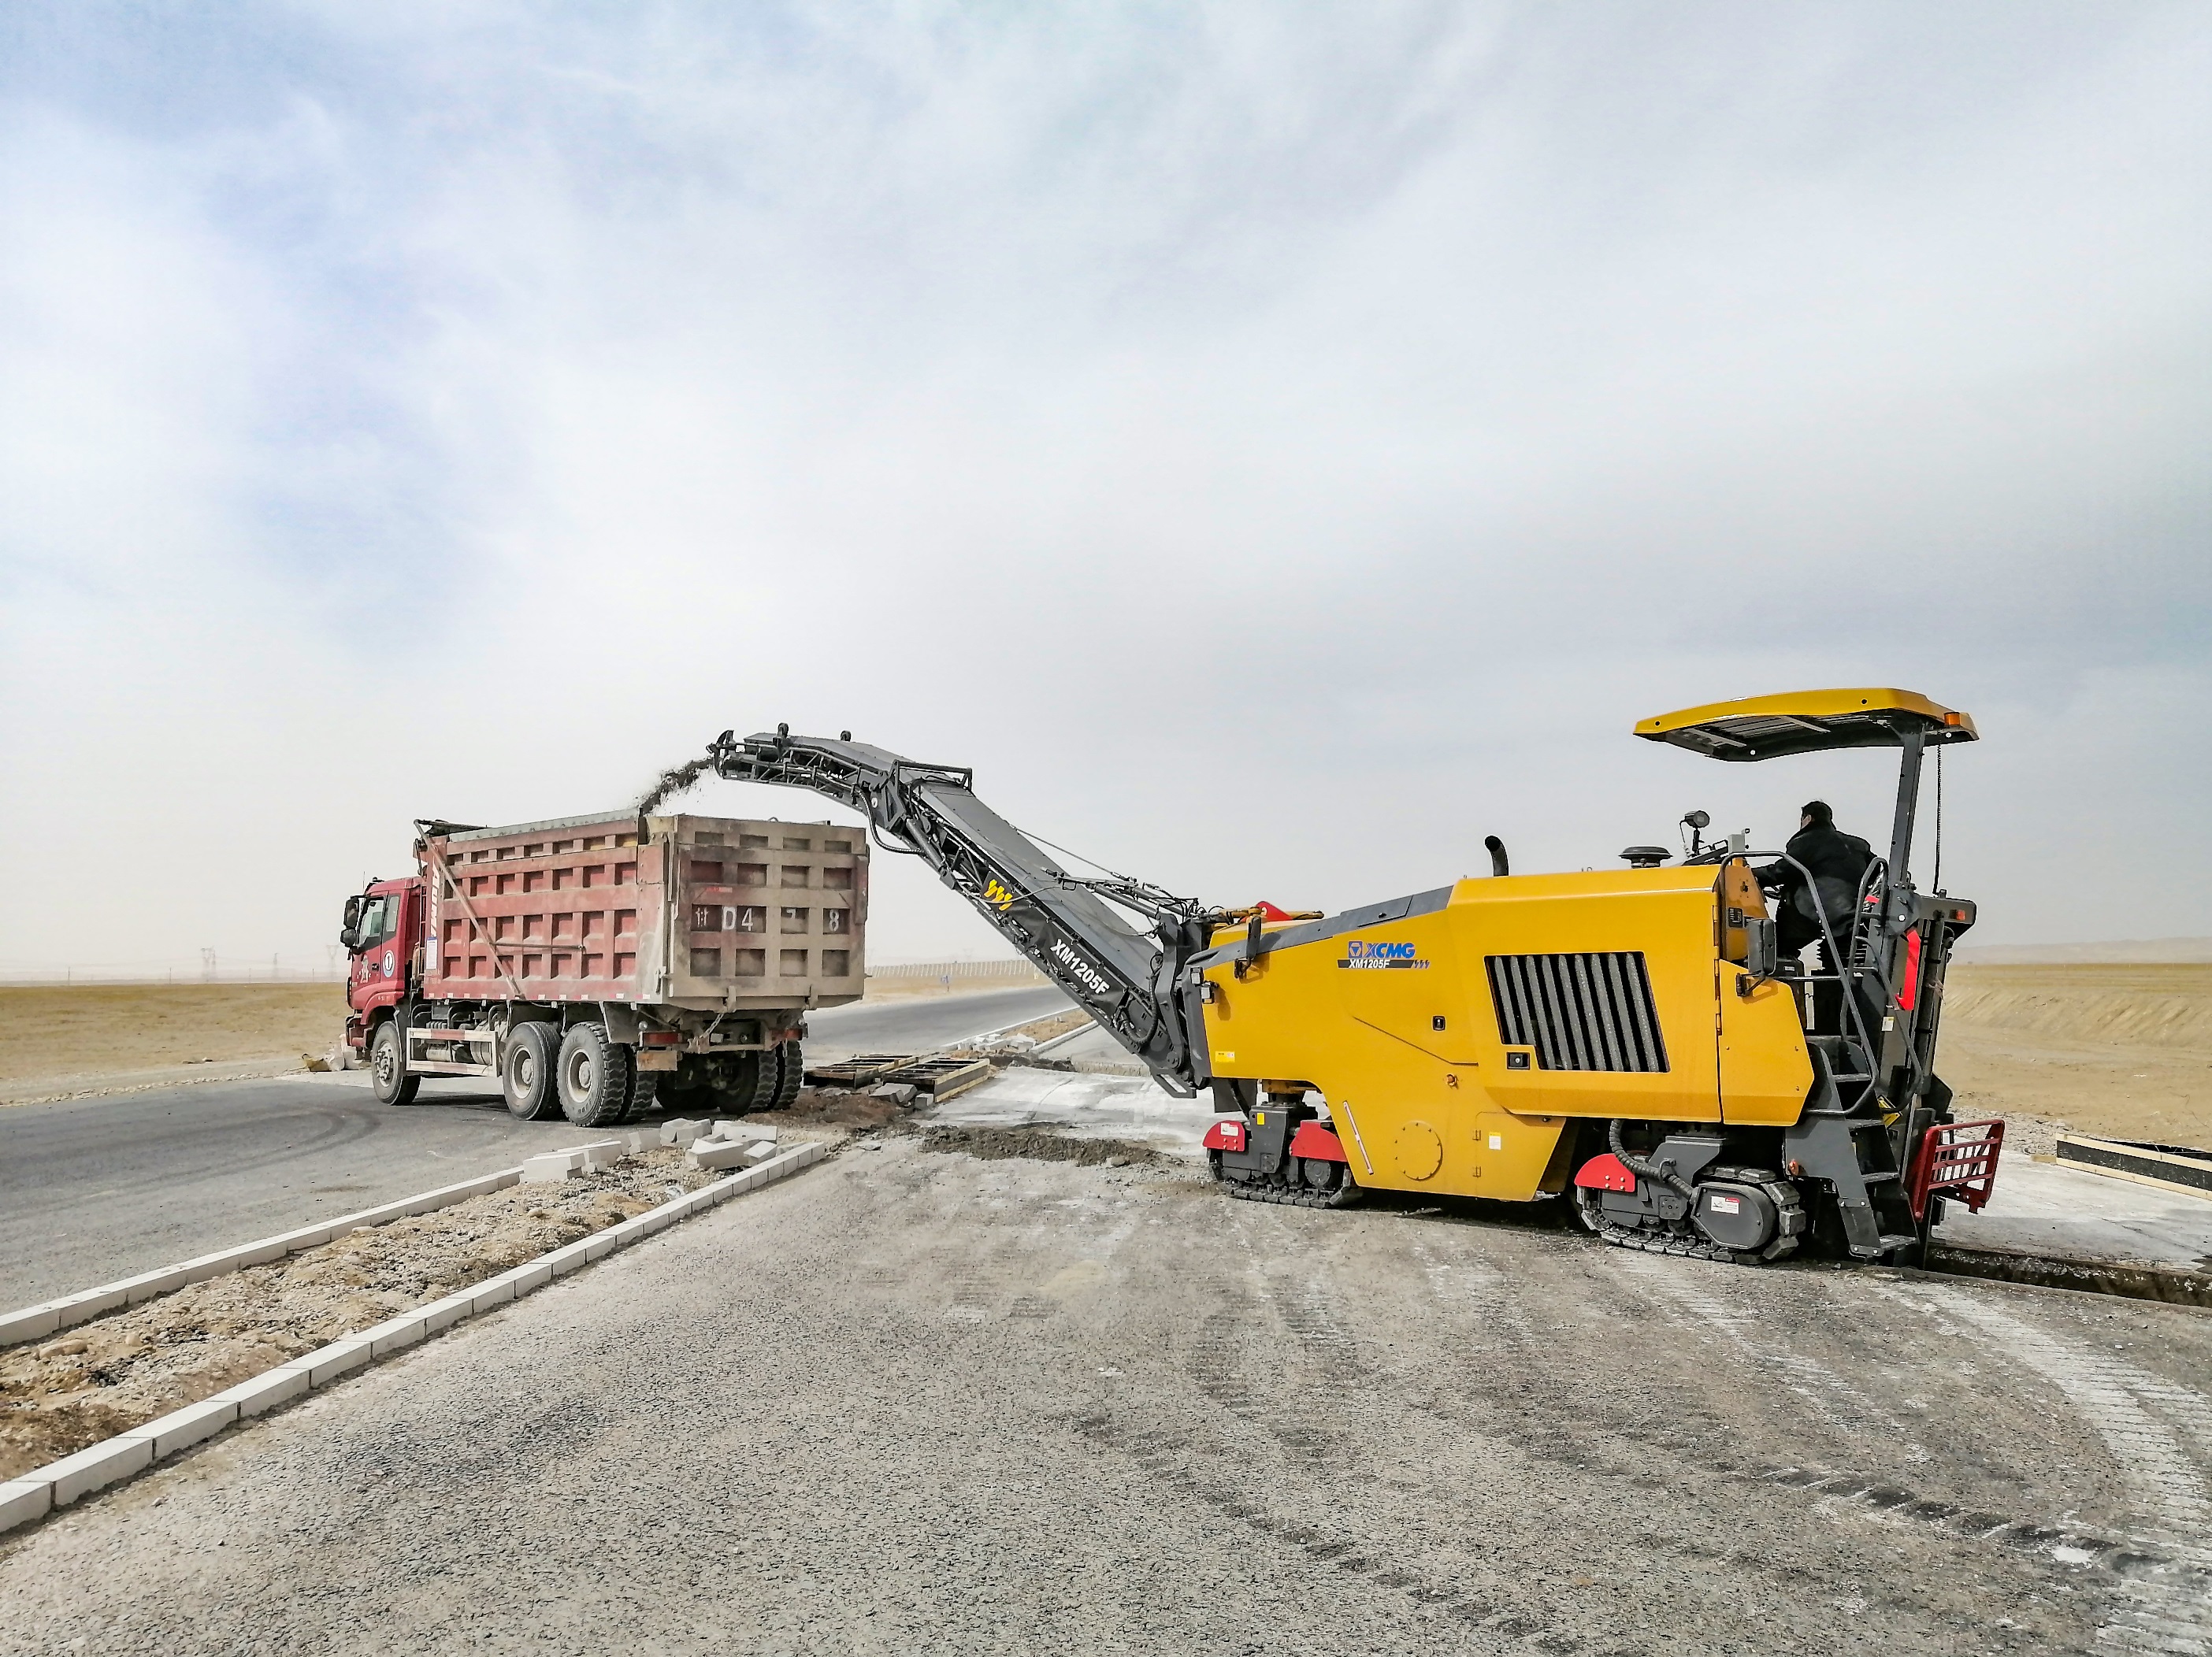 XCMG introduced several new models of road construction equipment